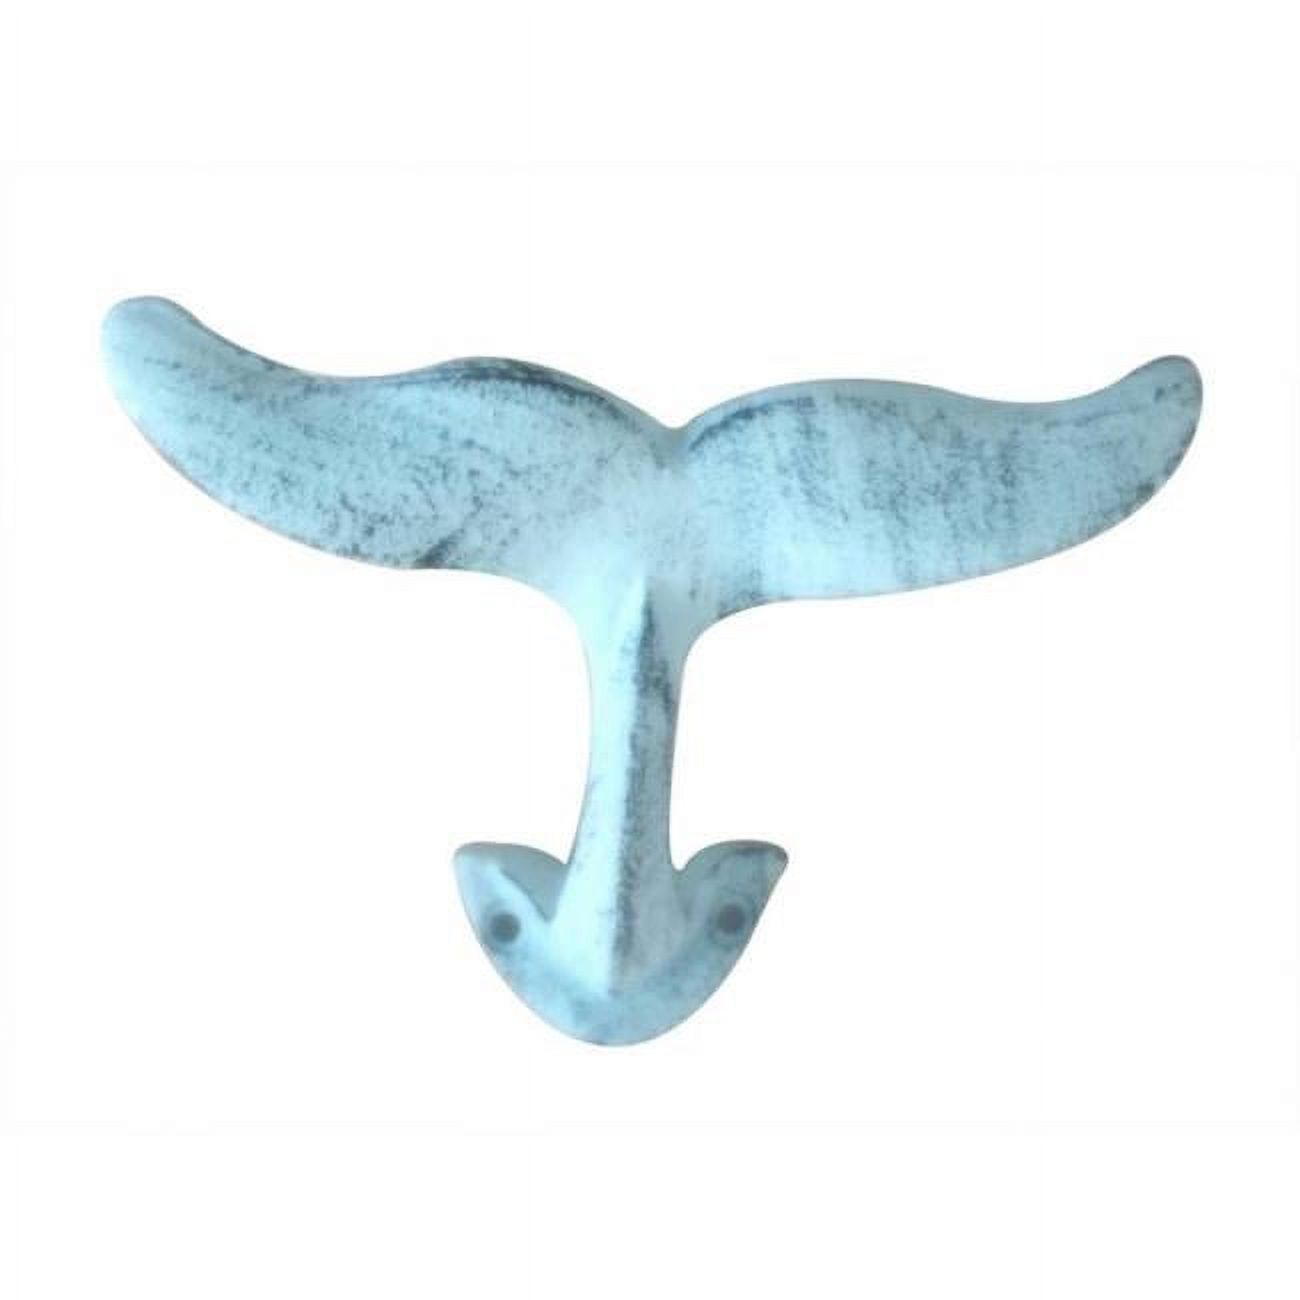 Handcrafted Model Ships K-0178-blue 5 in. Rustic Dark Blue Whitewashed Cast Iron Decorative Whale Tail Hook - image 1 of 2